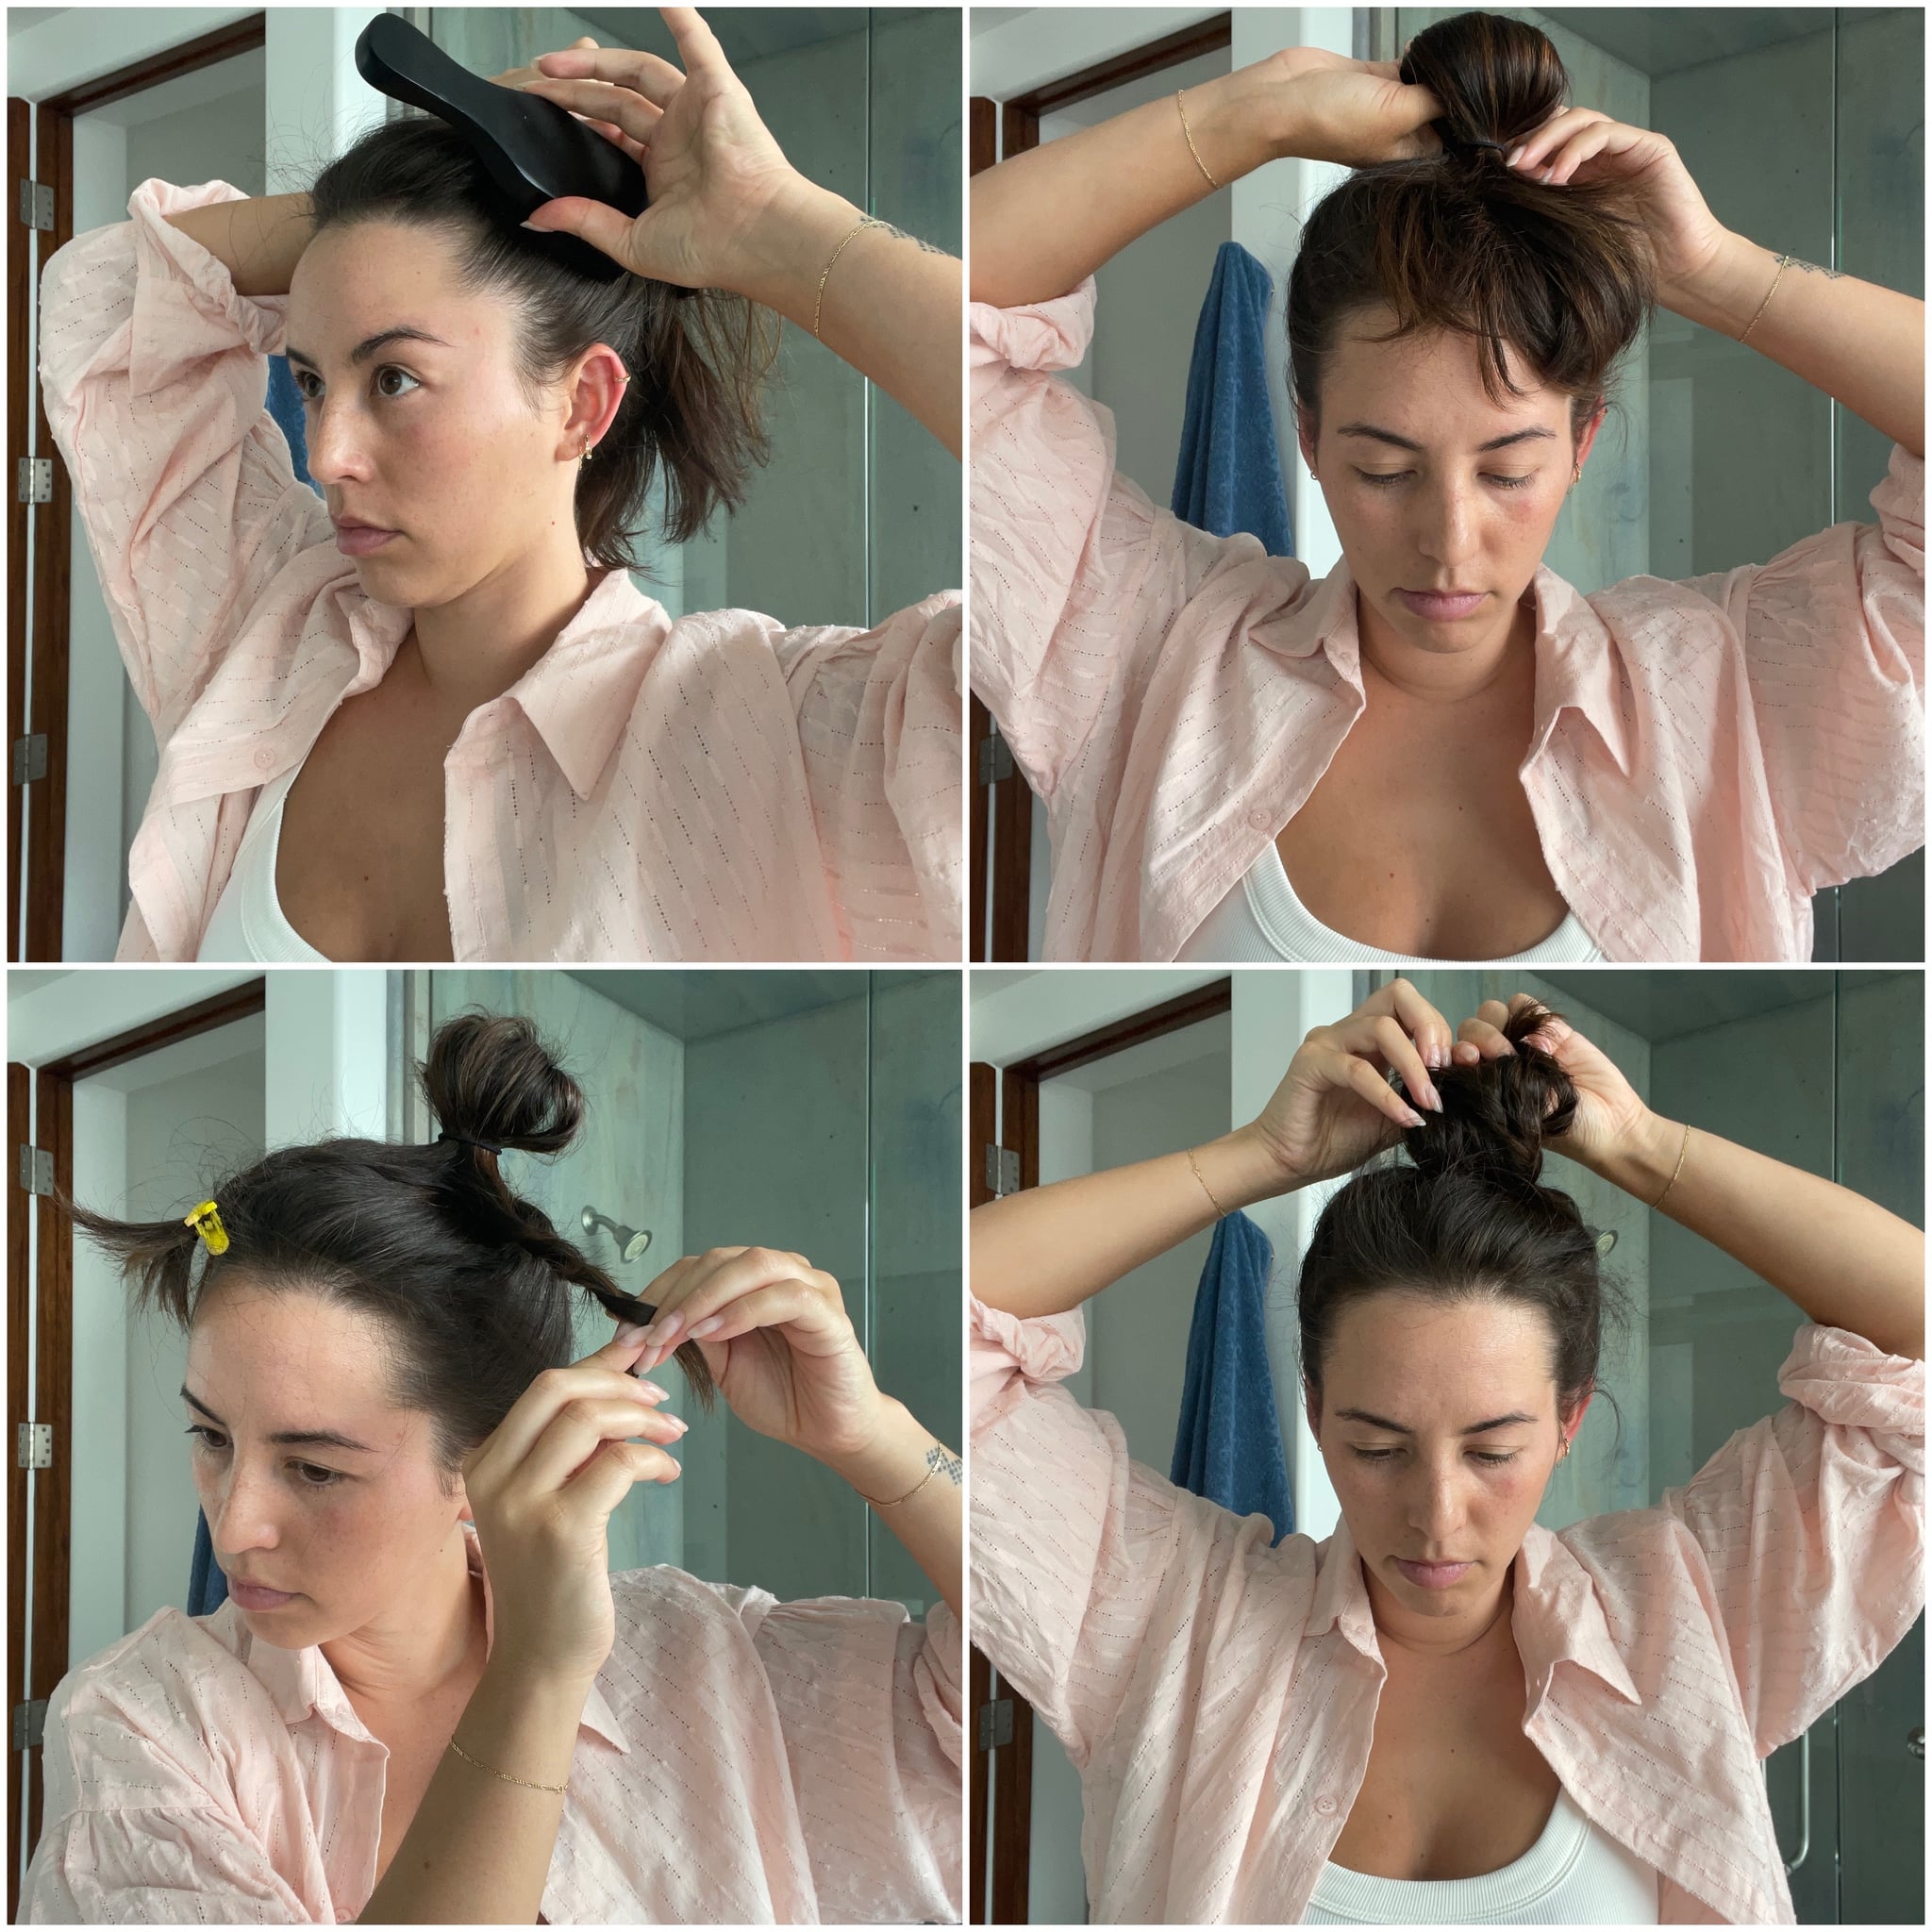 Woman reveals game-changing hack to French braid your hair in just 5  minutes & anyone can do it